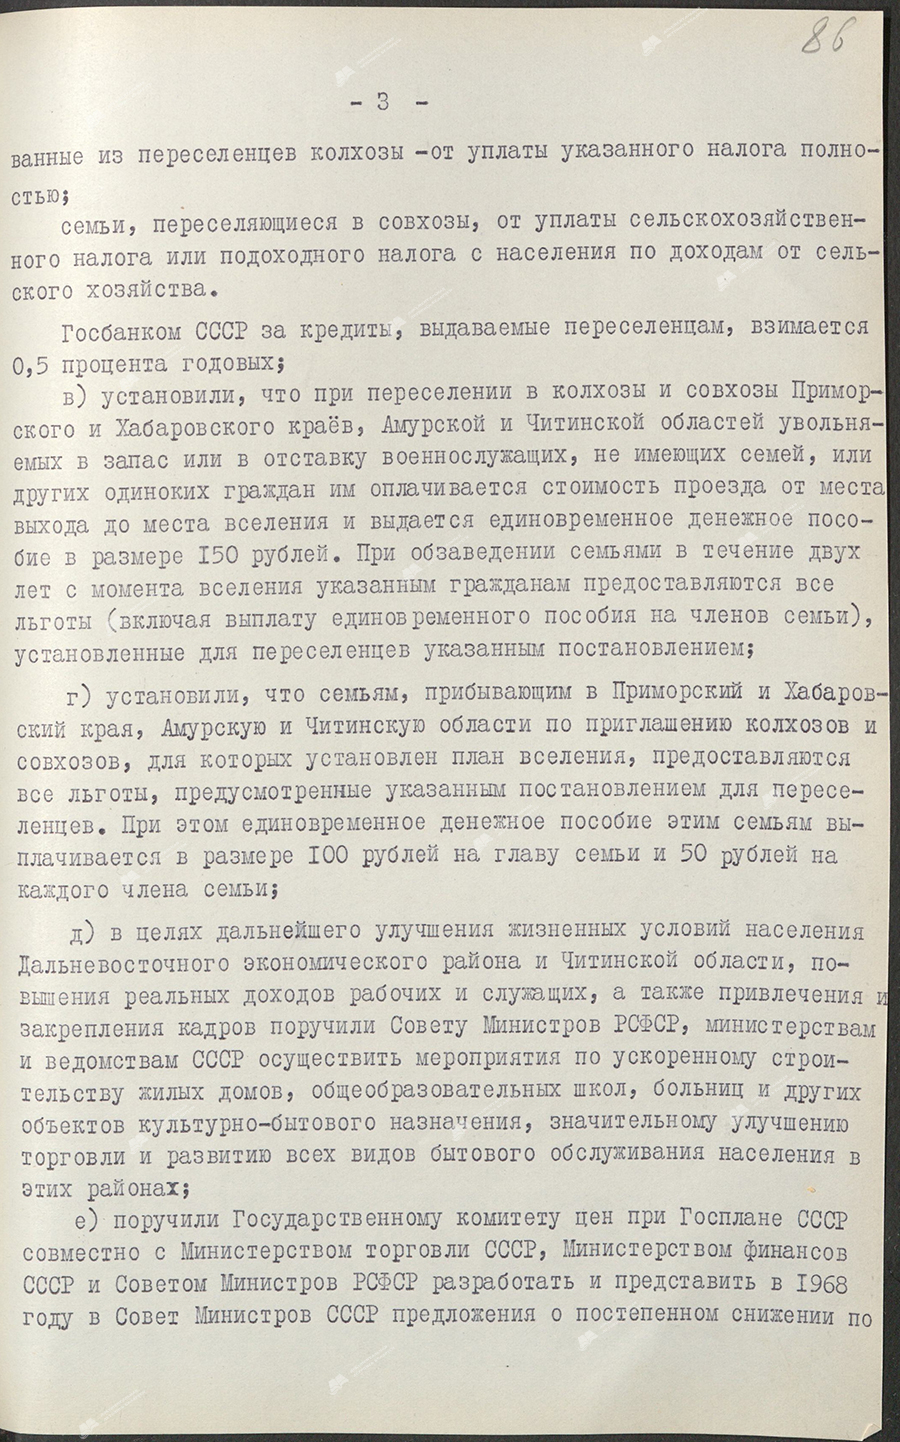 Resolution of the Central Committee of the Communist Party of Belarus and the Council of Ministers of the BSSR «On the plan for the resettlement of families from the BSSR to collective farms and state farms of the Far Eastern economic region and the Chita region»-стр. 2